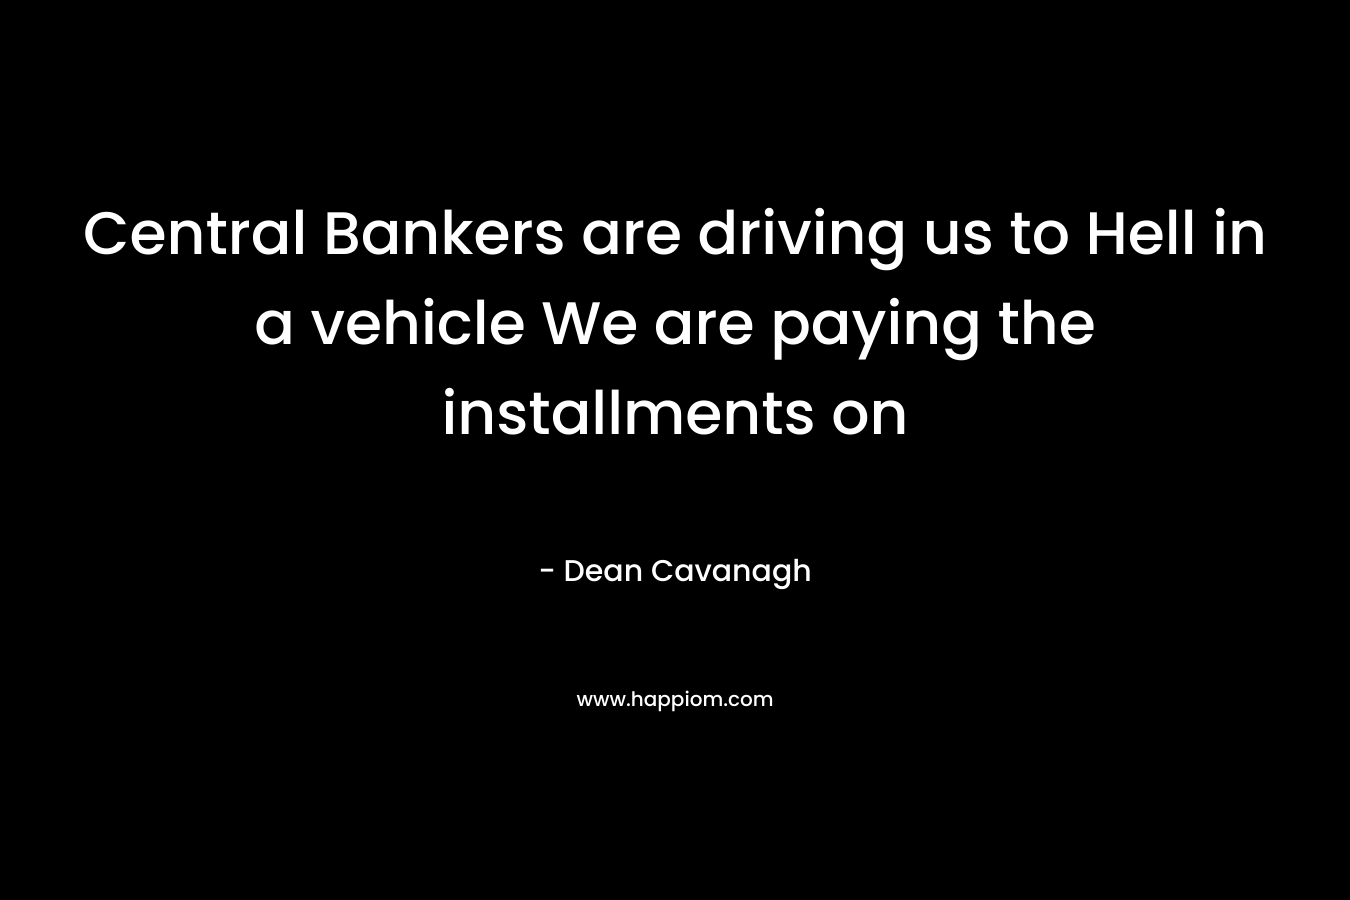 Central Bankers are driving us to Hell in a vehicle We are paying the installments on